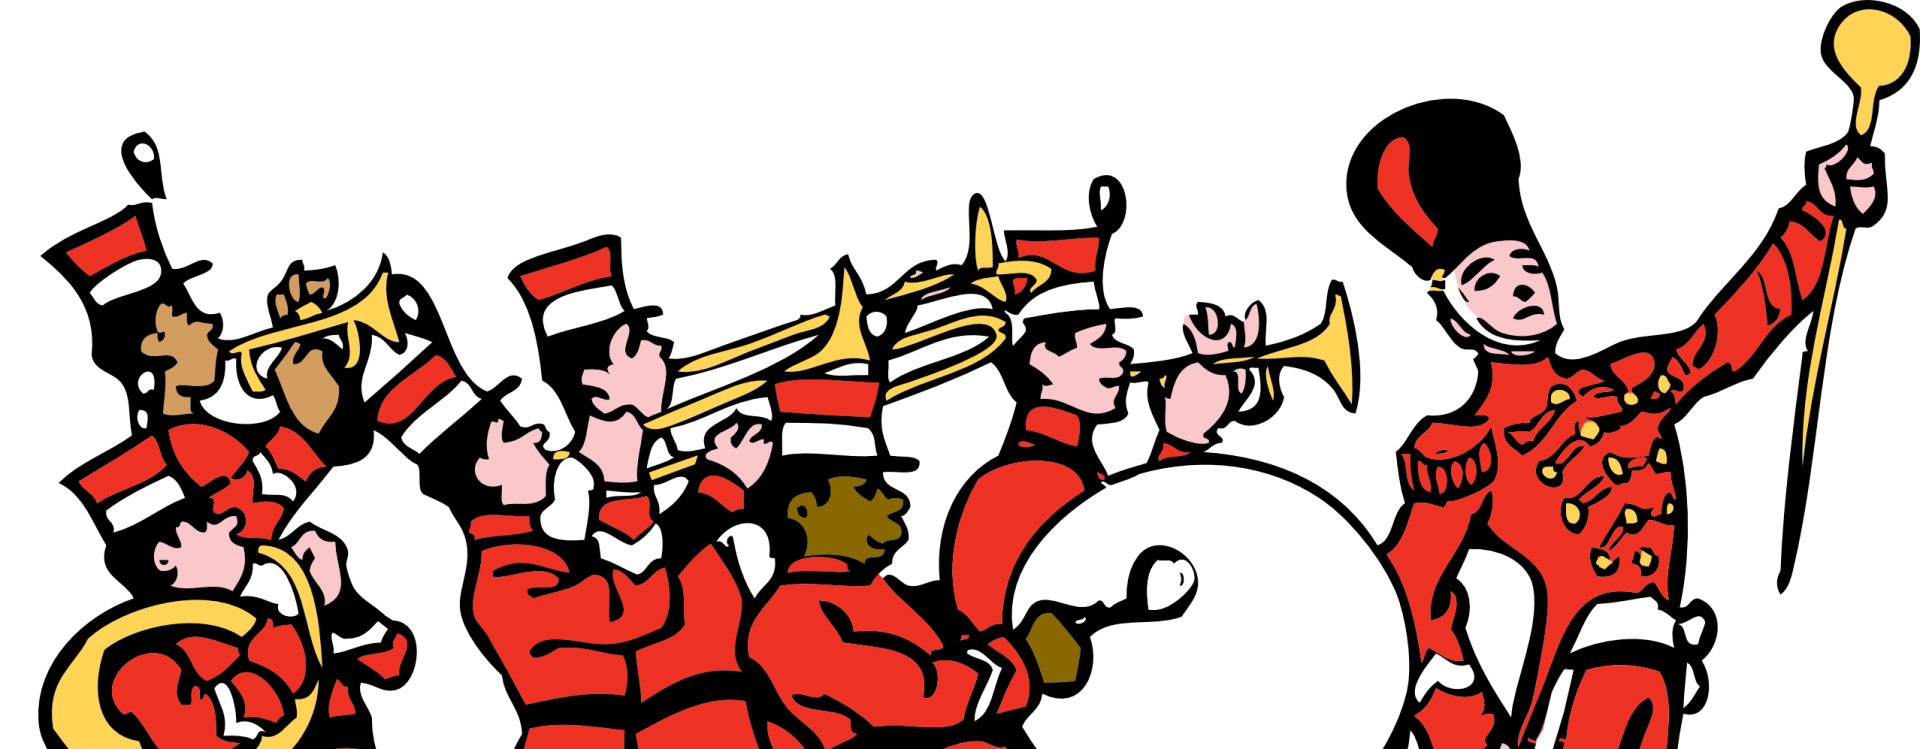 clipart band instruments png.